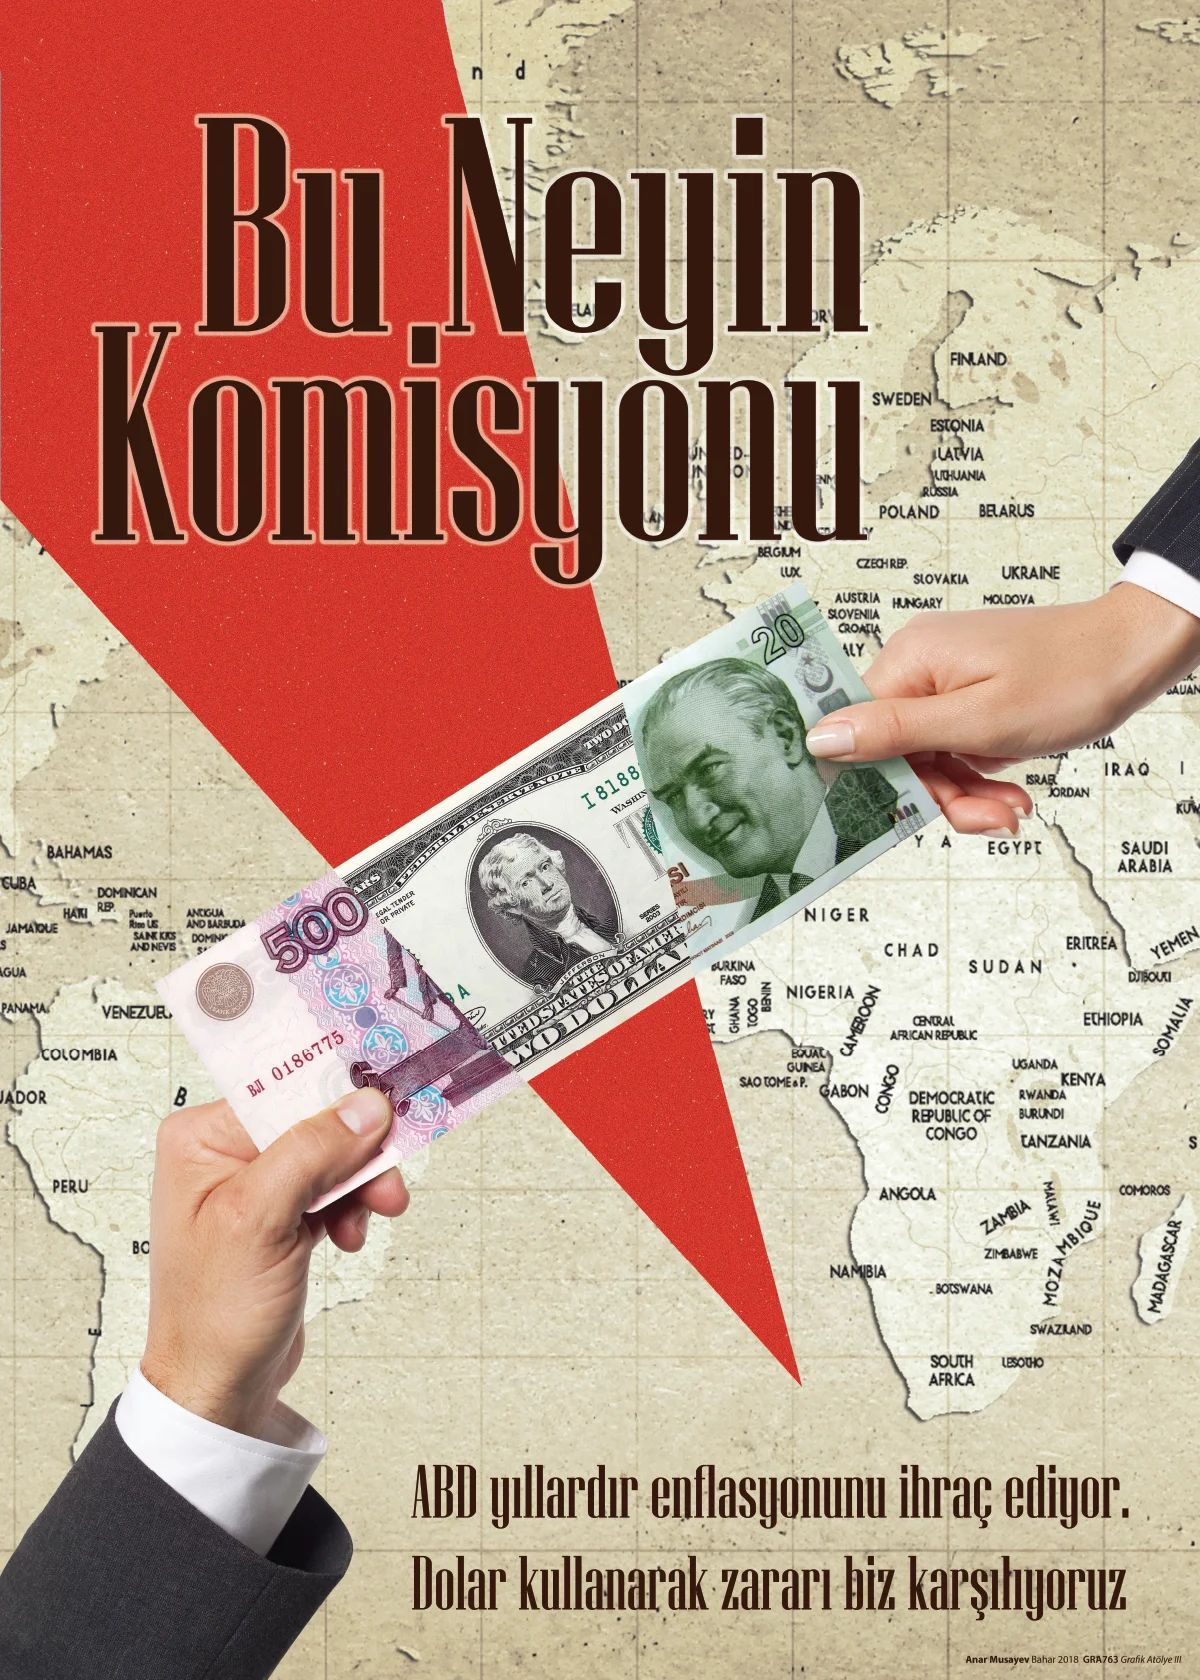 Campaign to promote national currencies